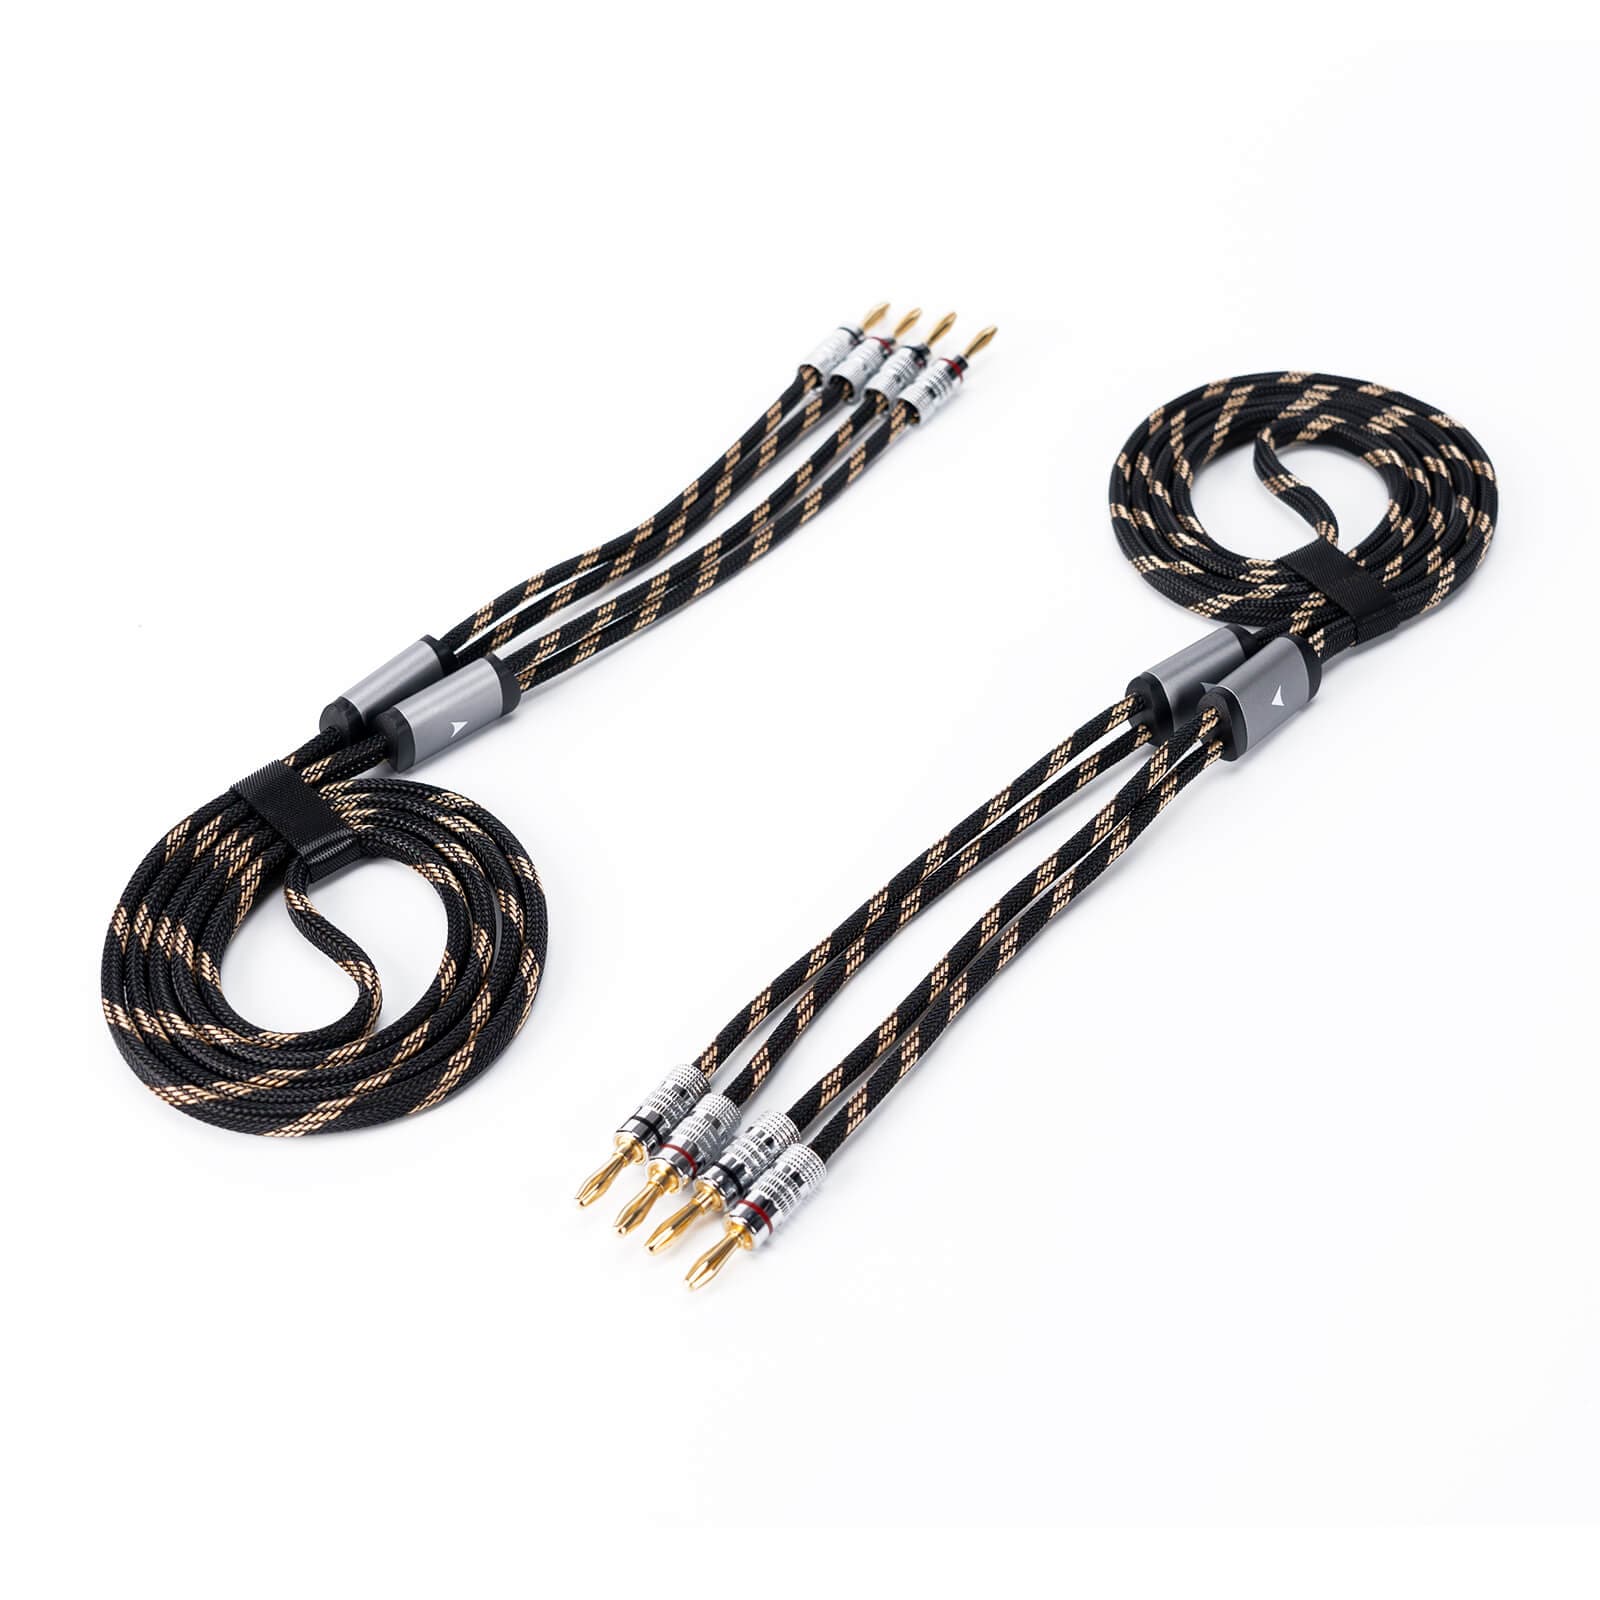 Fosi Audio 2-Pack of Nylon Braided Hi-Fi Speaker Cable Wire with Gold-Plated Banana Tip Plugs - 5.9ft/1.8M Each